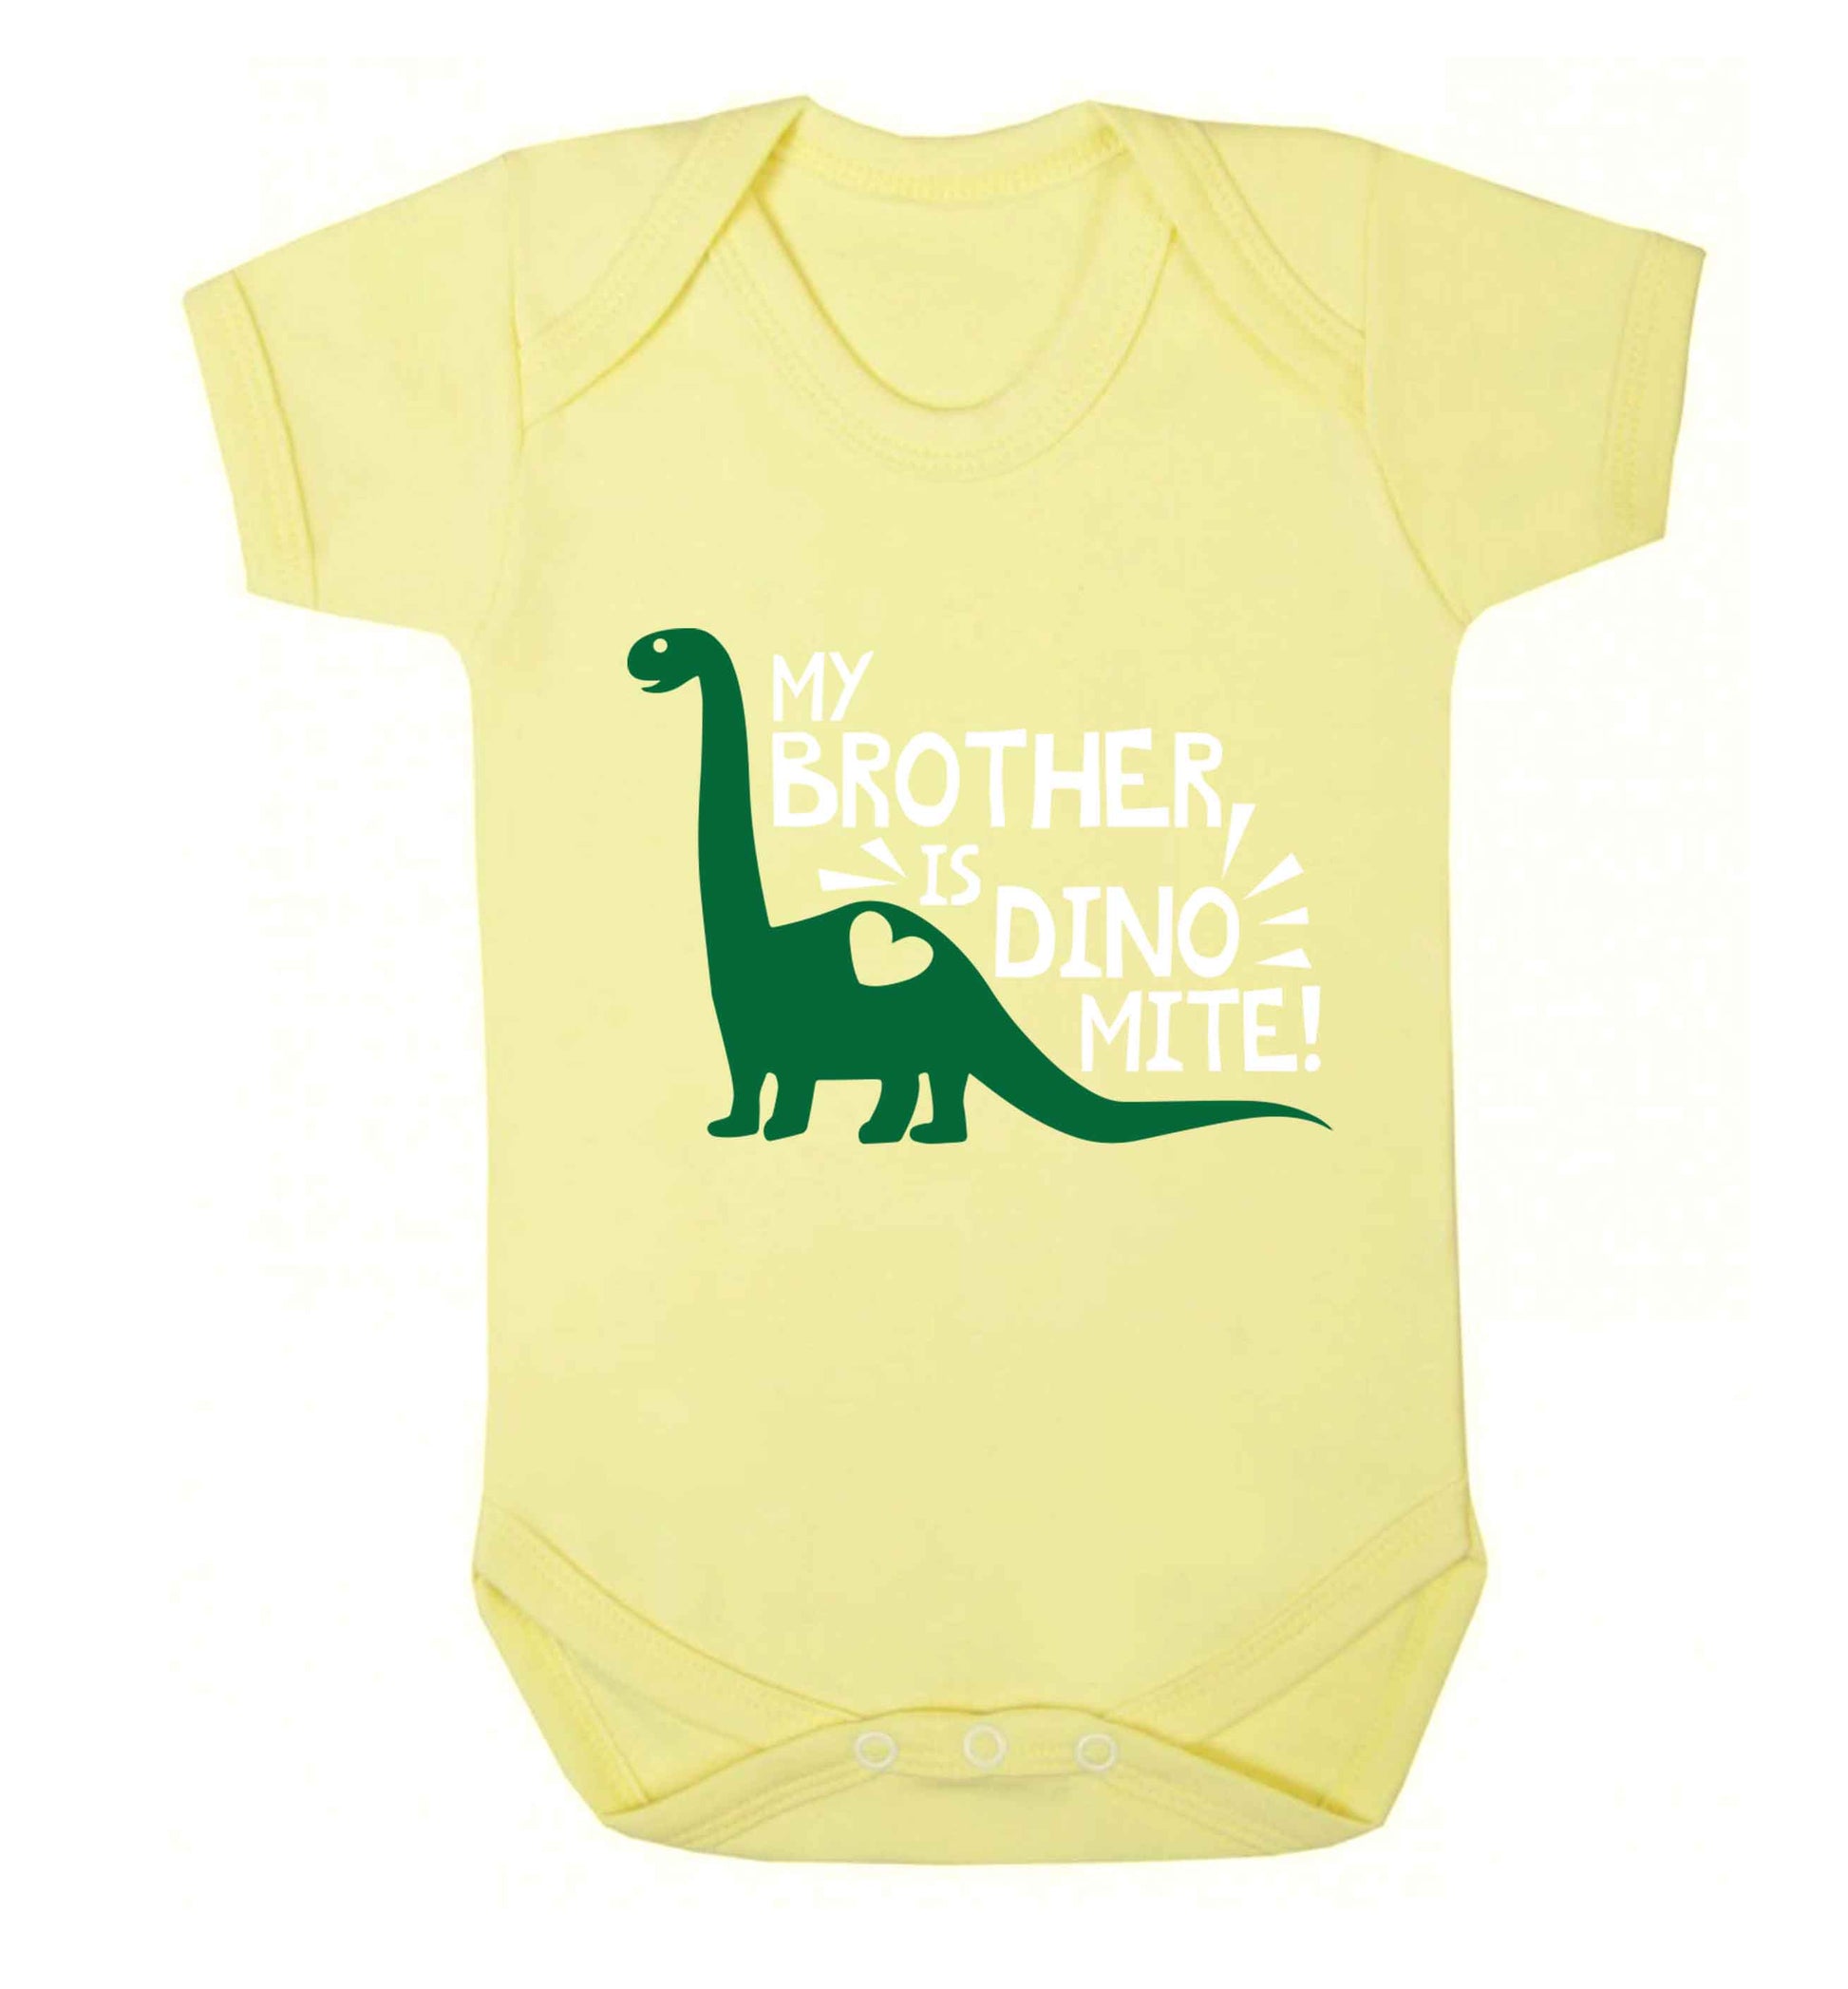 My brother is dinomite! Baby Vest pale yellow 18-24 months